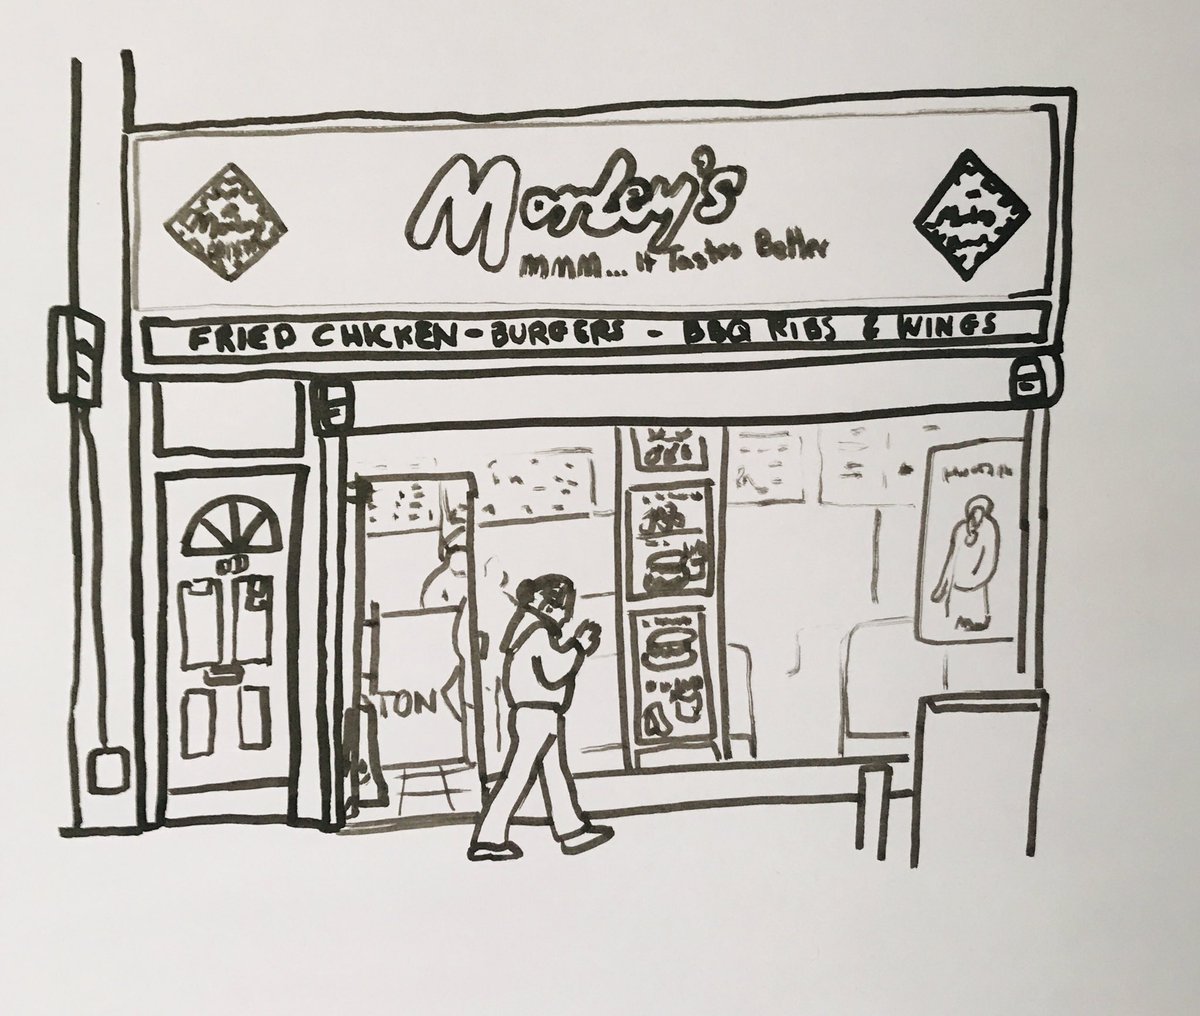 Today’s #sketch from the 4/2/24 of #Landmarks & #Icons is #Morleys @MorleysChicken #BrixtonRoad #Brixton #London #SW9 #Acrylic #Ink #Marker #Pen on paper + #Drawing More sketches instagram.com/frankkiely/